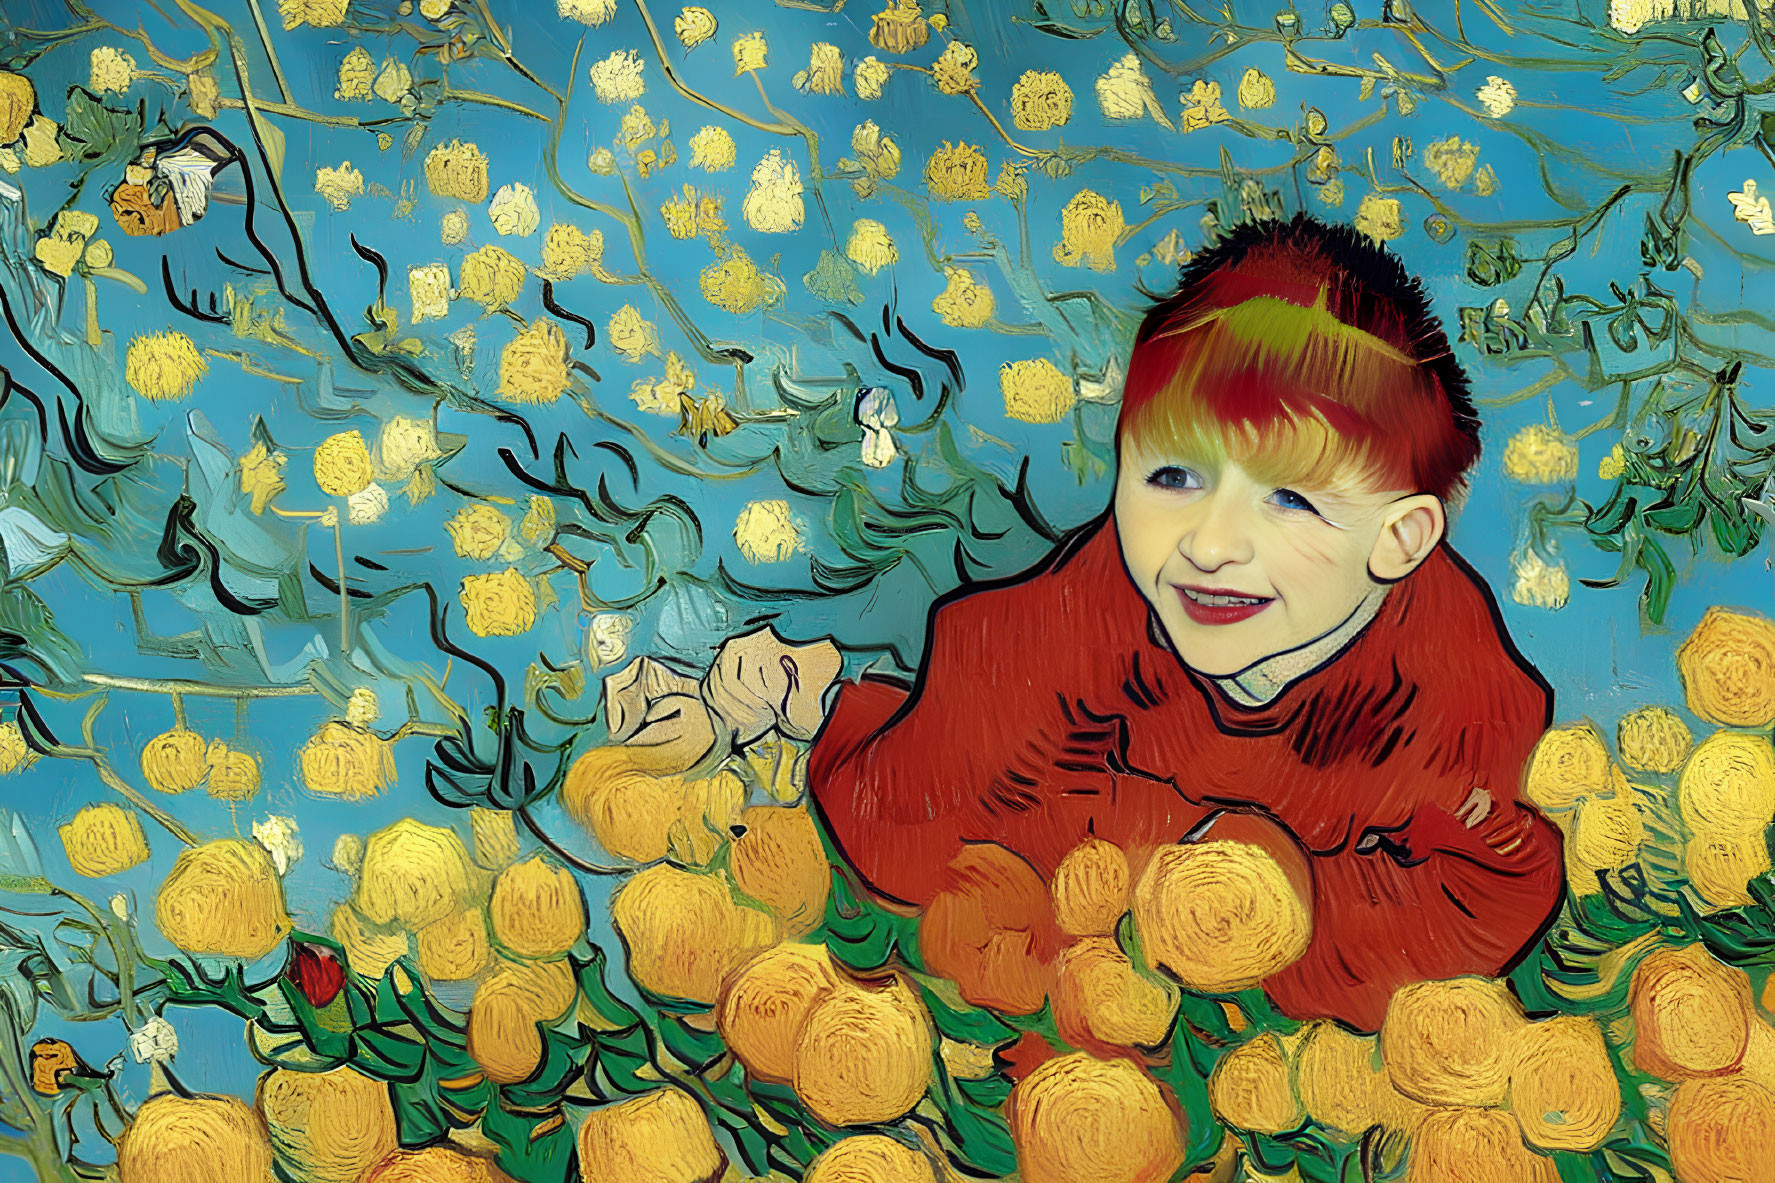 Red-haired child superimposed on "Starry Night" painting